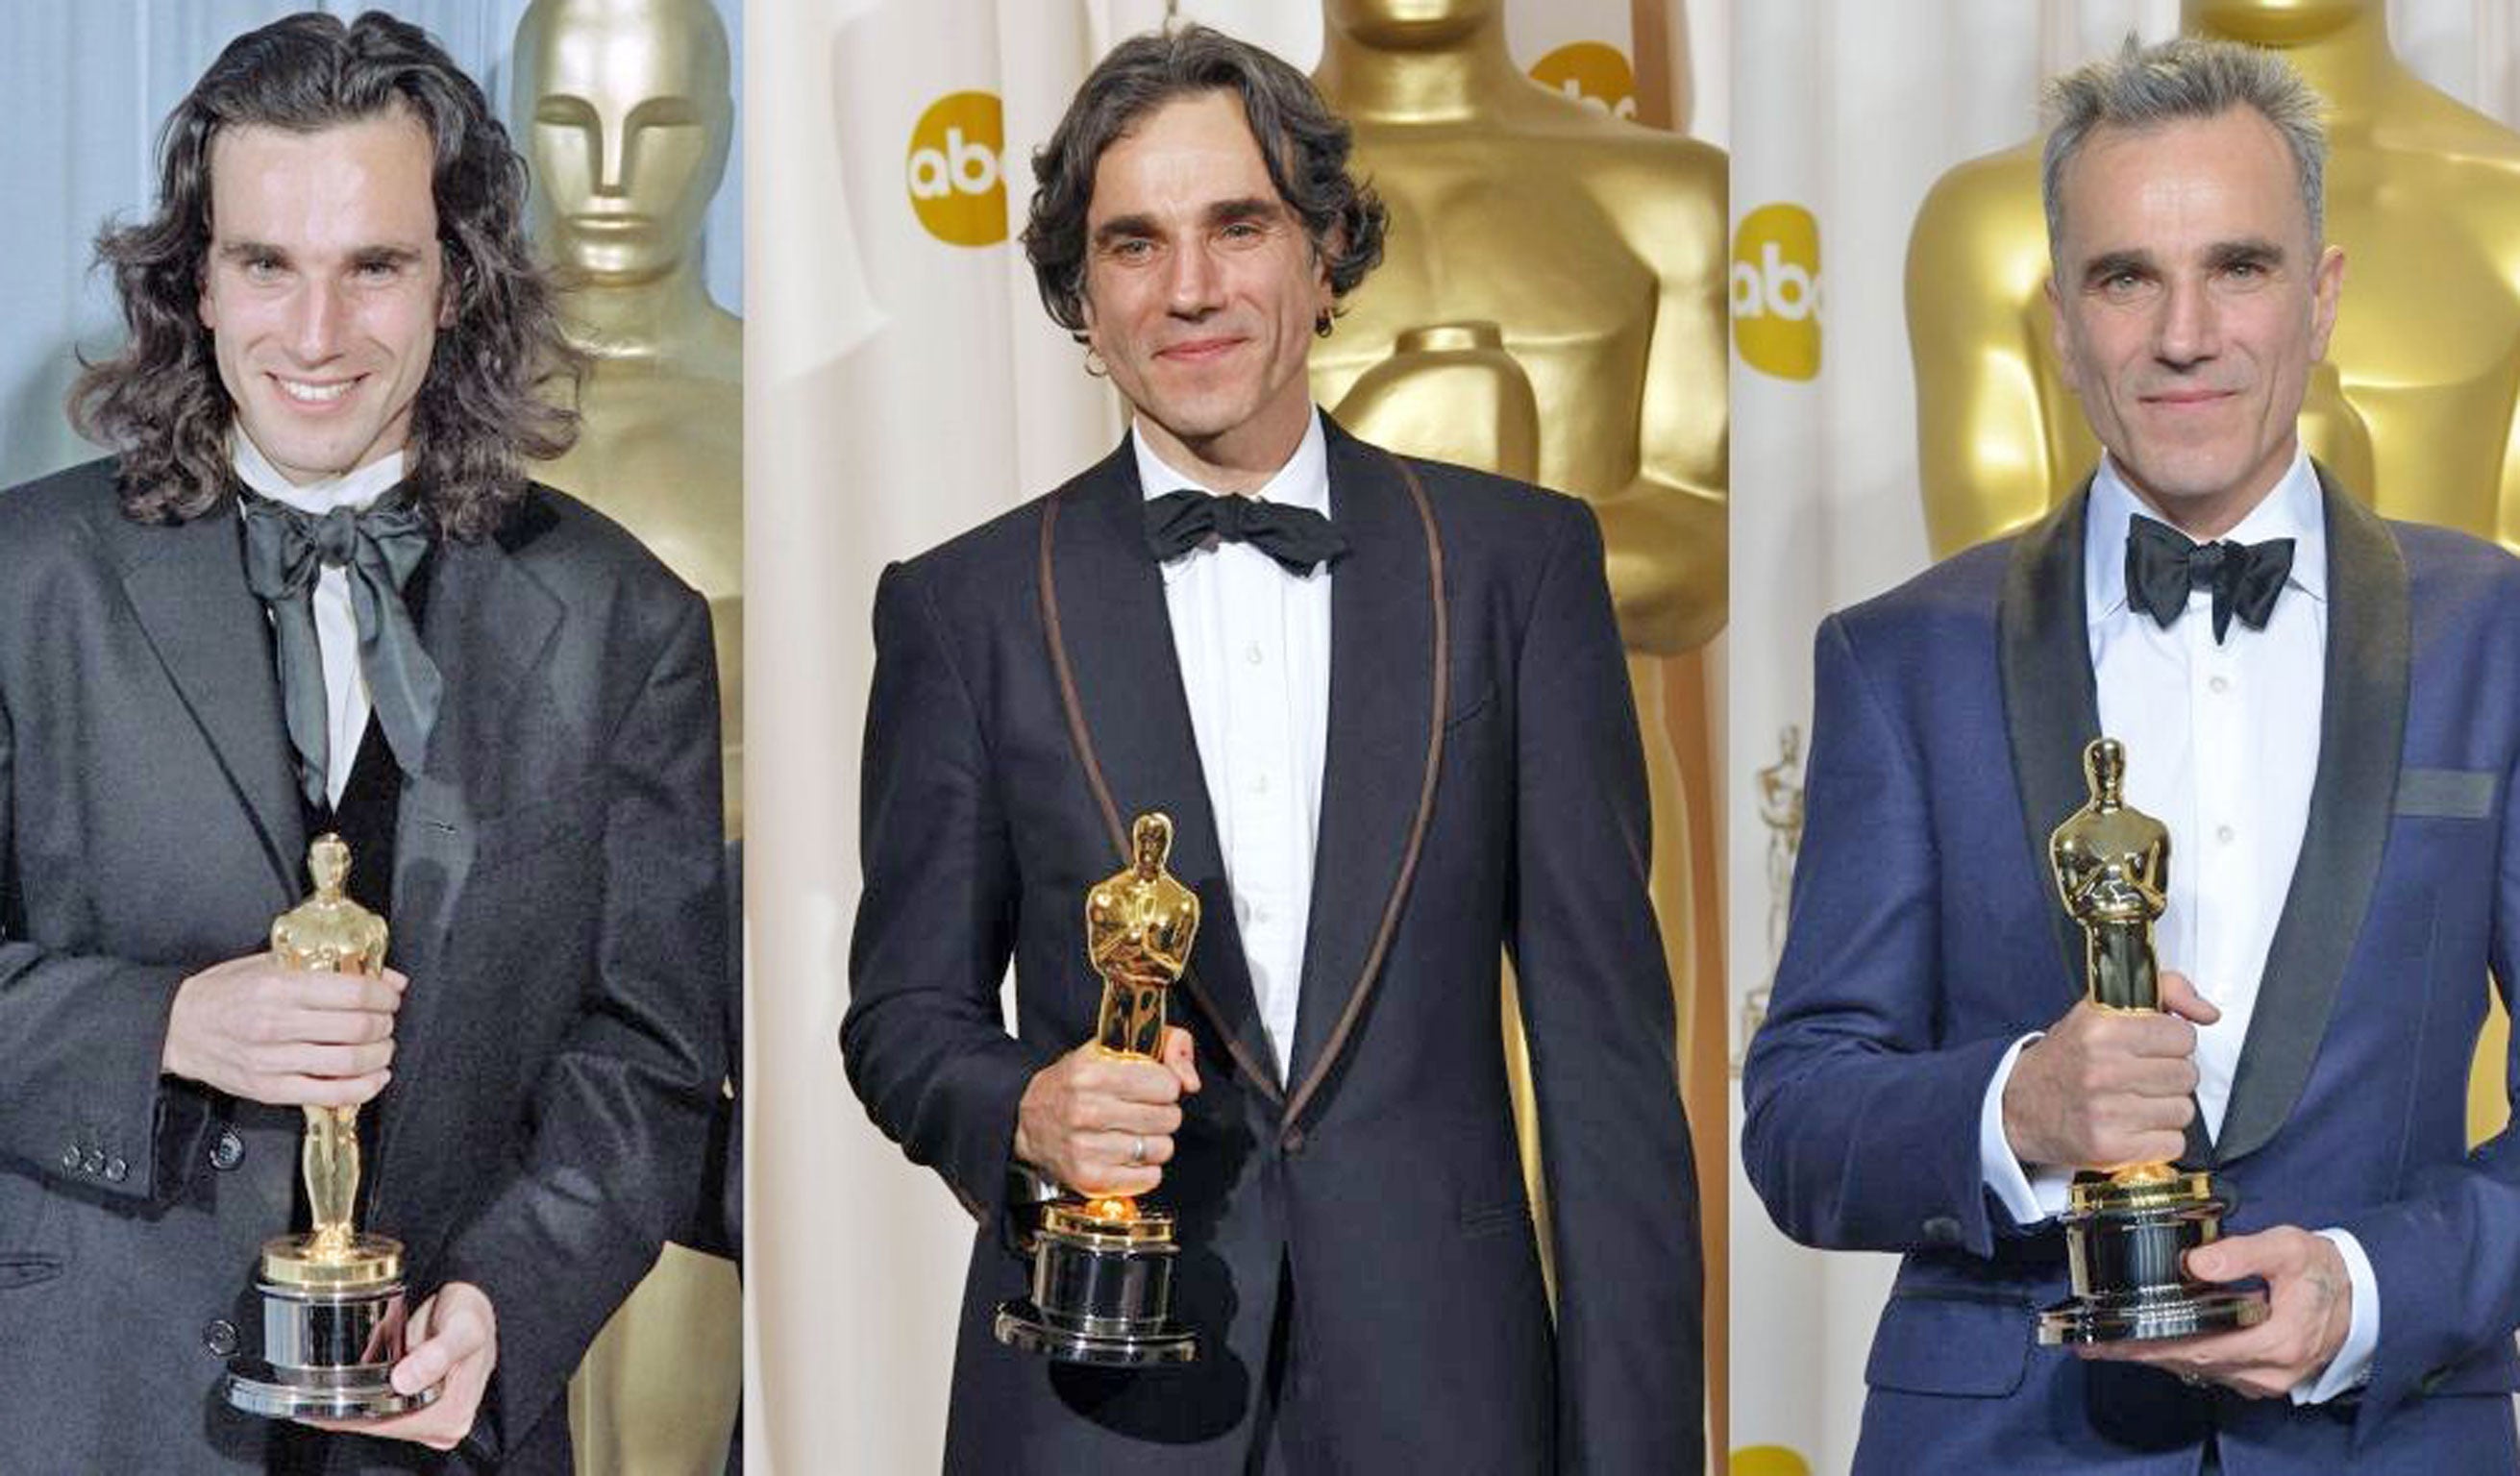 Daniel Day-Lewis picks up his Oscars for My Left Foot (1990), There Will Be Blood (2008) and Lincoln (2013)